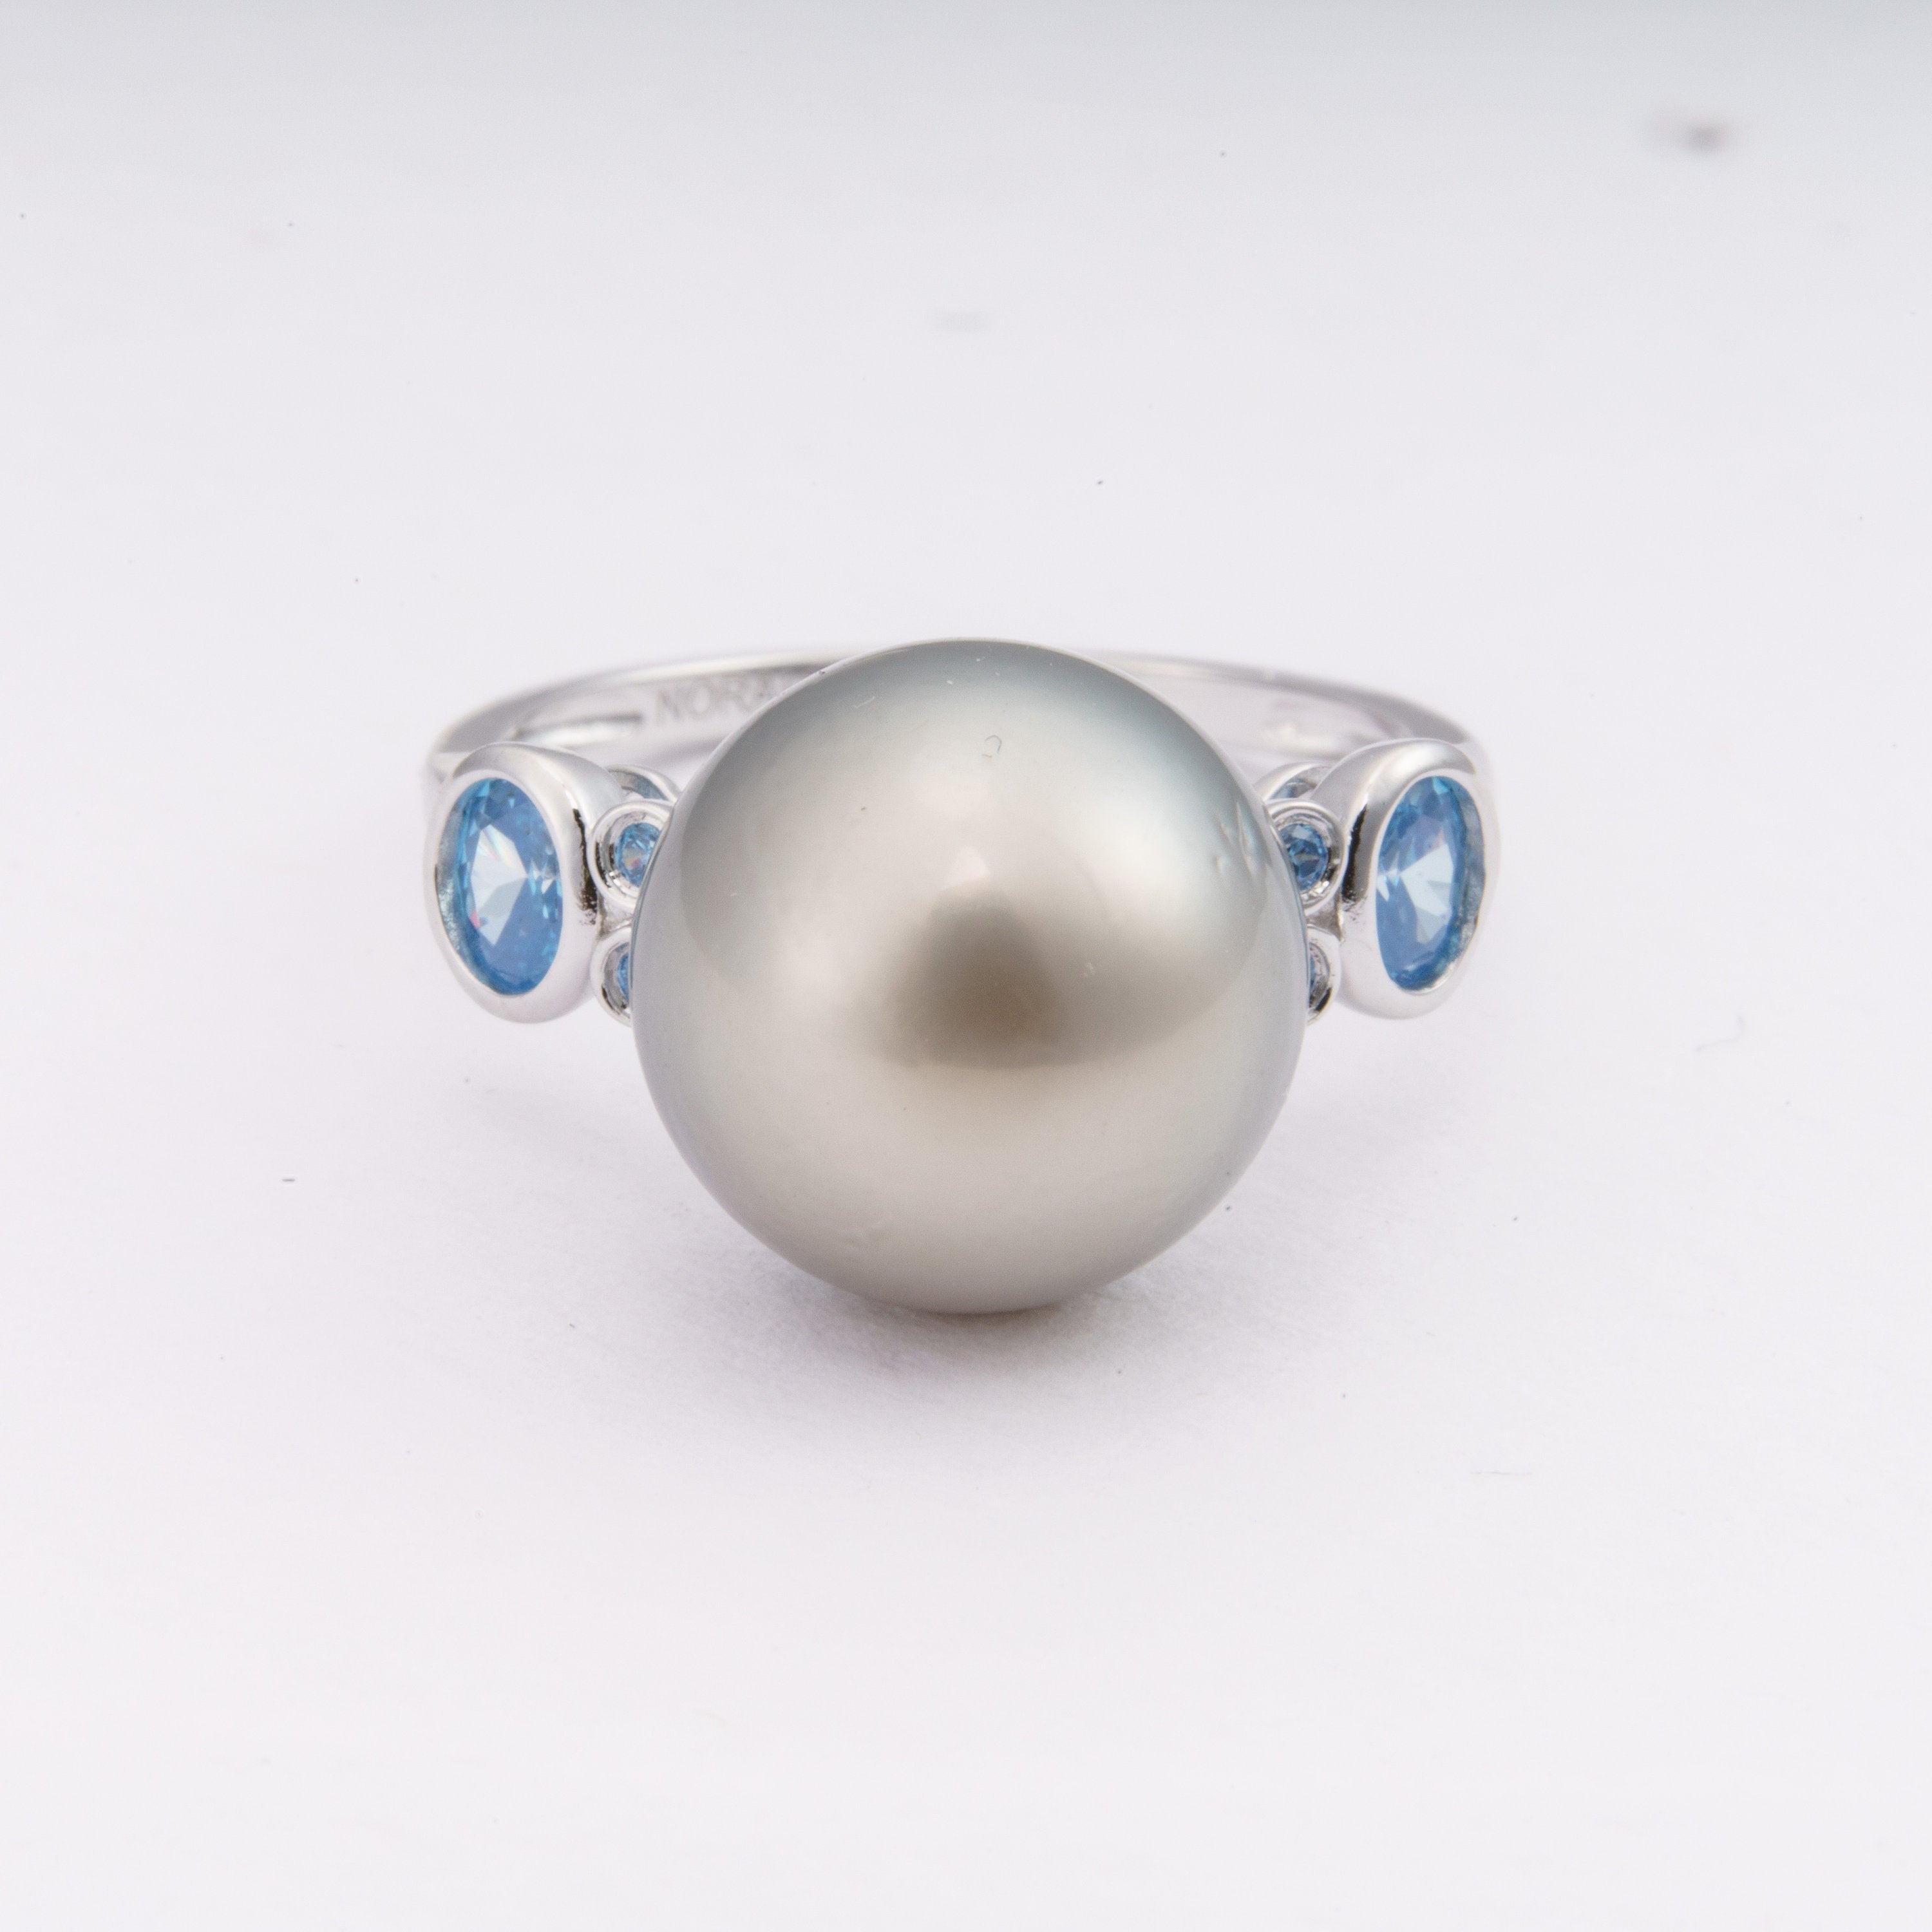 11mm tahitian pearl ring, size 5.5 us, 925 sterling silver with cubic zirconia